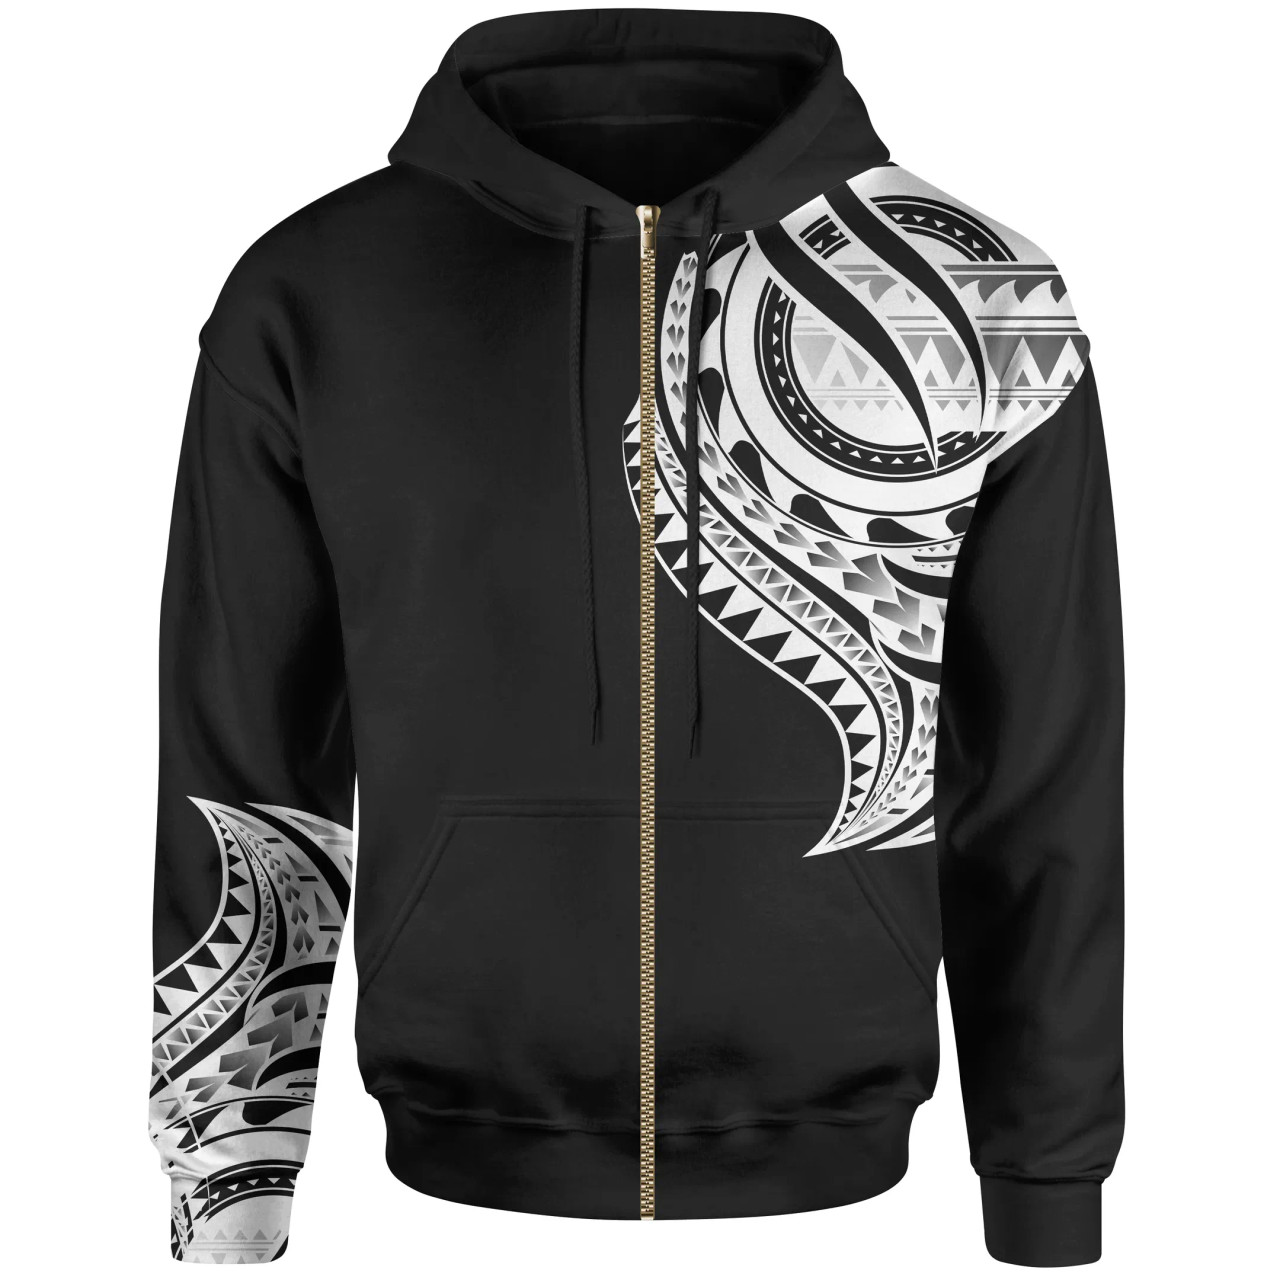 Yap State Hoodie - Yap State Tatau White Patterns With Coat Of Arms